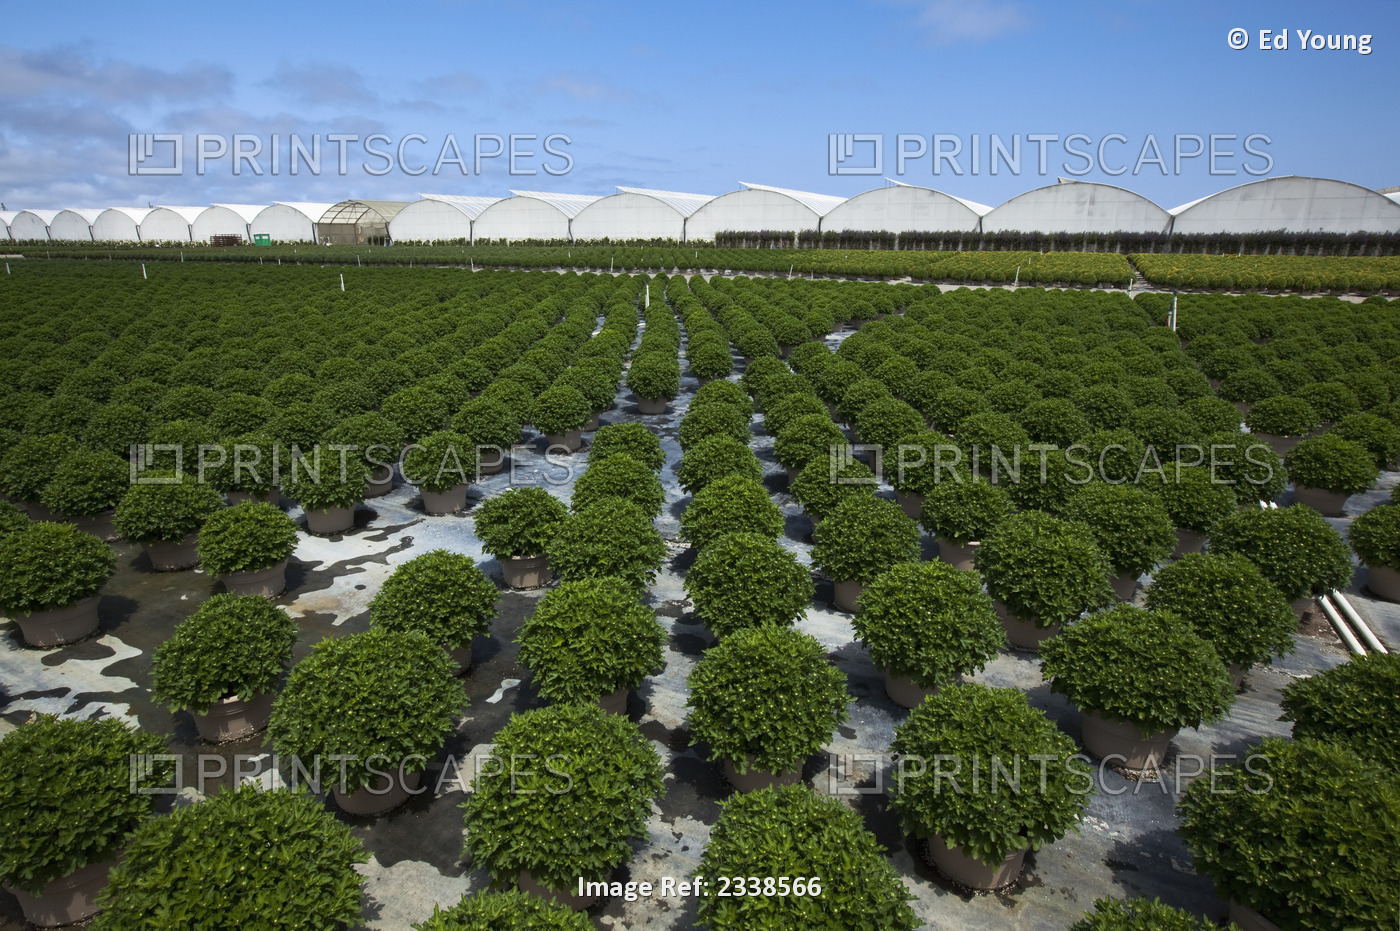 Agriculture - Potted ornamentals, bedding plants and shrubs at a horticultural ...